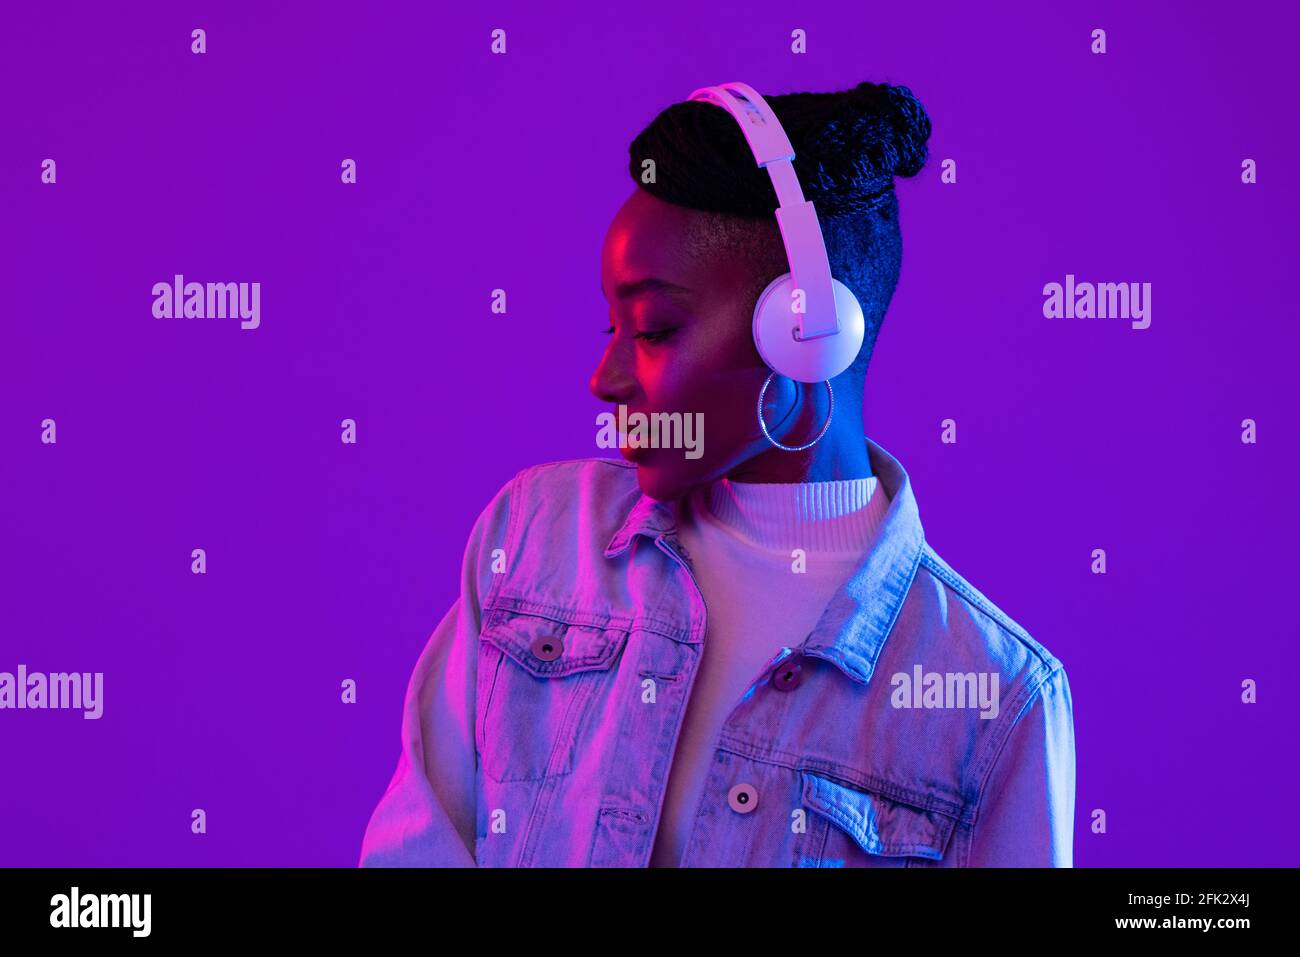 Young African American woman wearing headphones listening to music in futuristic purple cyberpunk neon light background Stock Photo